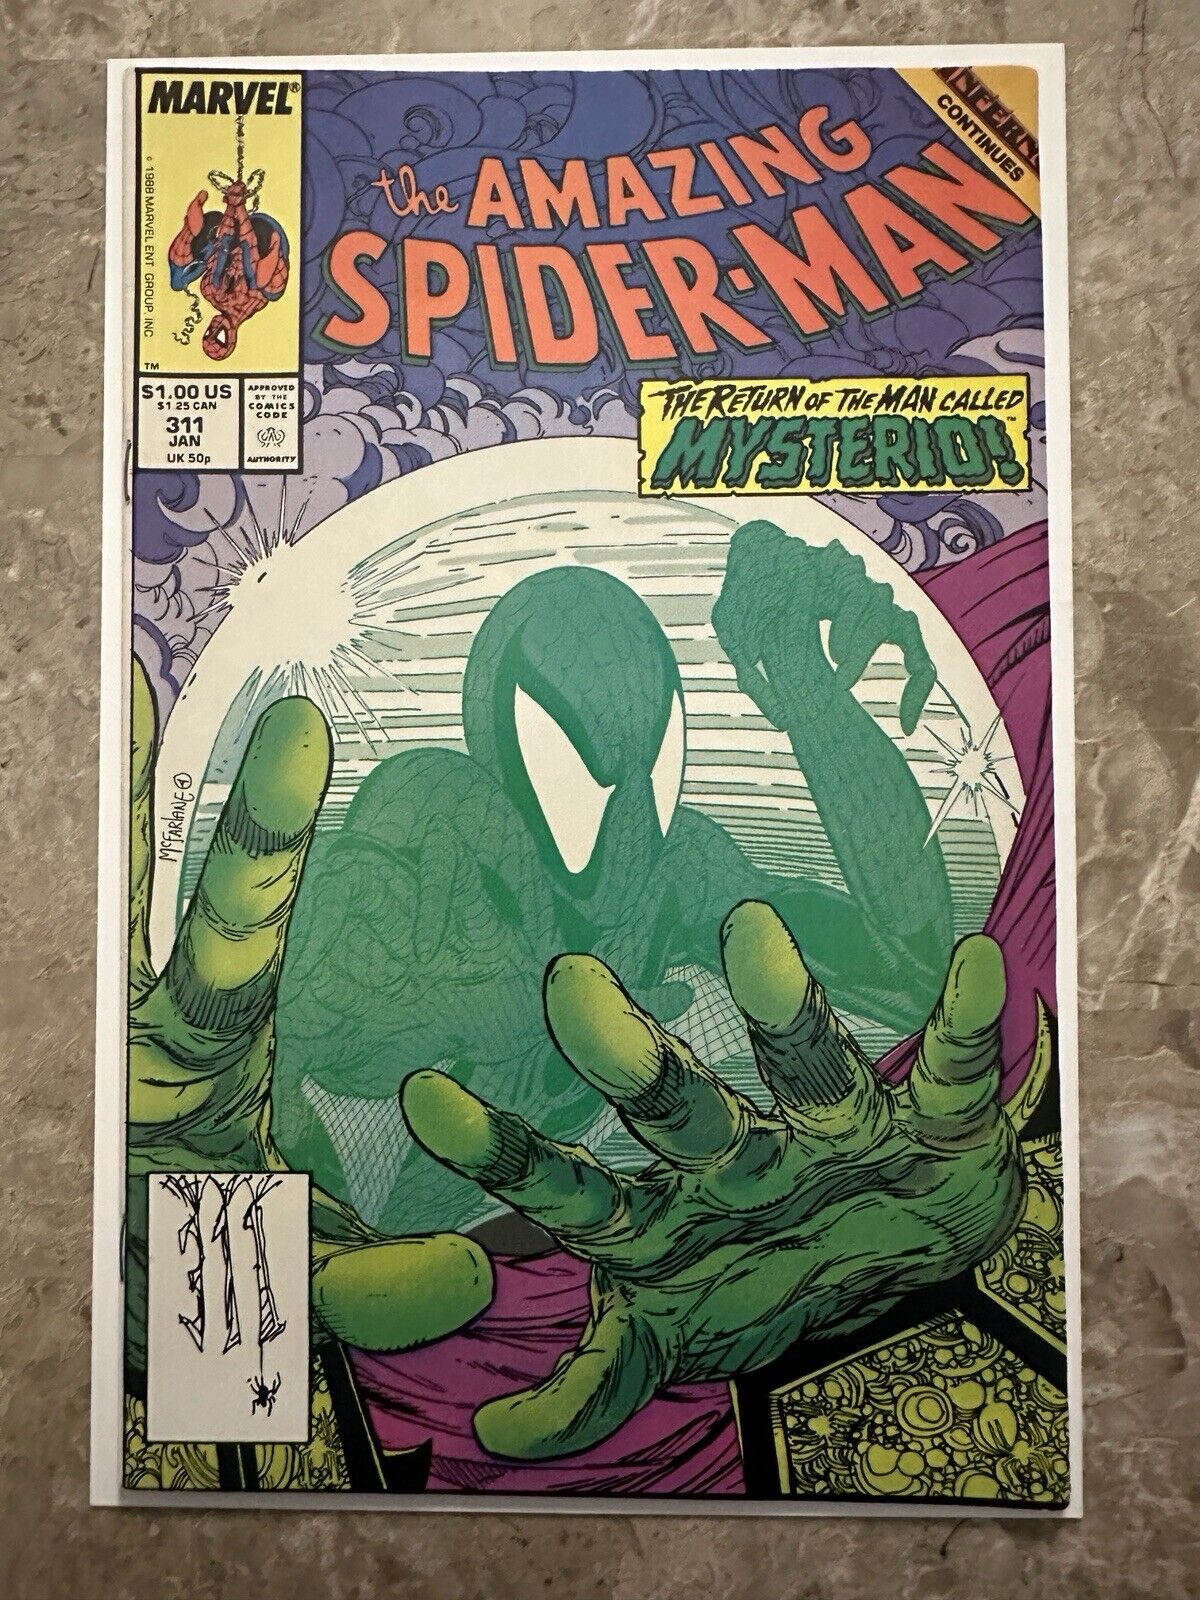 Amazing Spider-Man #311 FN/VF (1989 Marvel Comics) - Very solid copy